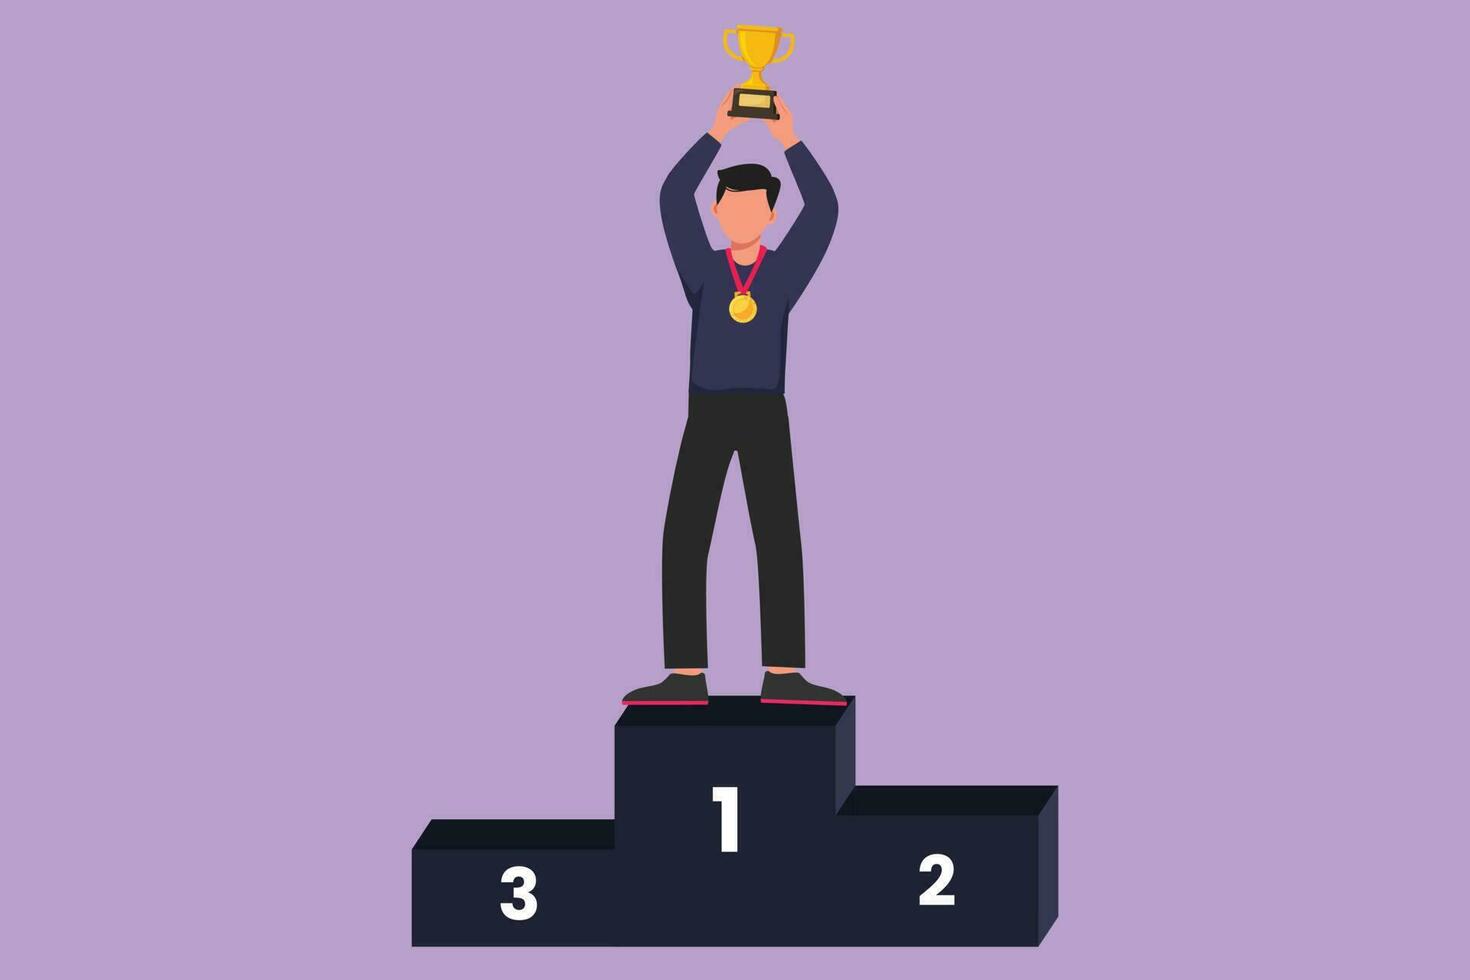 Cartoon flat style drawing of happy male athlete wearing sports jersey lifting golden trophy with both hands on podium. Celebrating victory of national championship. Graphic design vector illustration